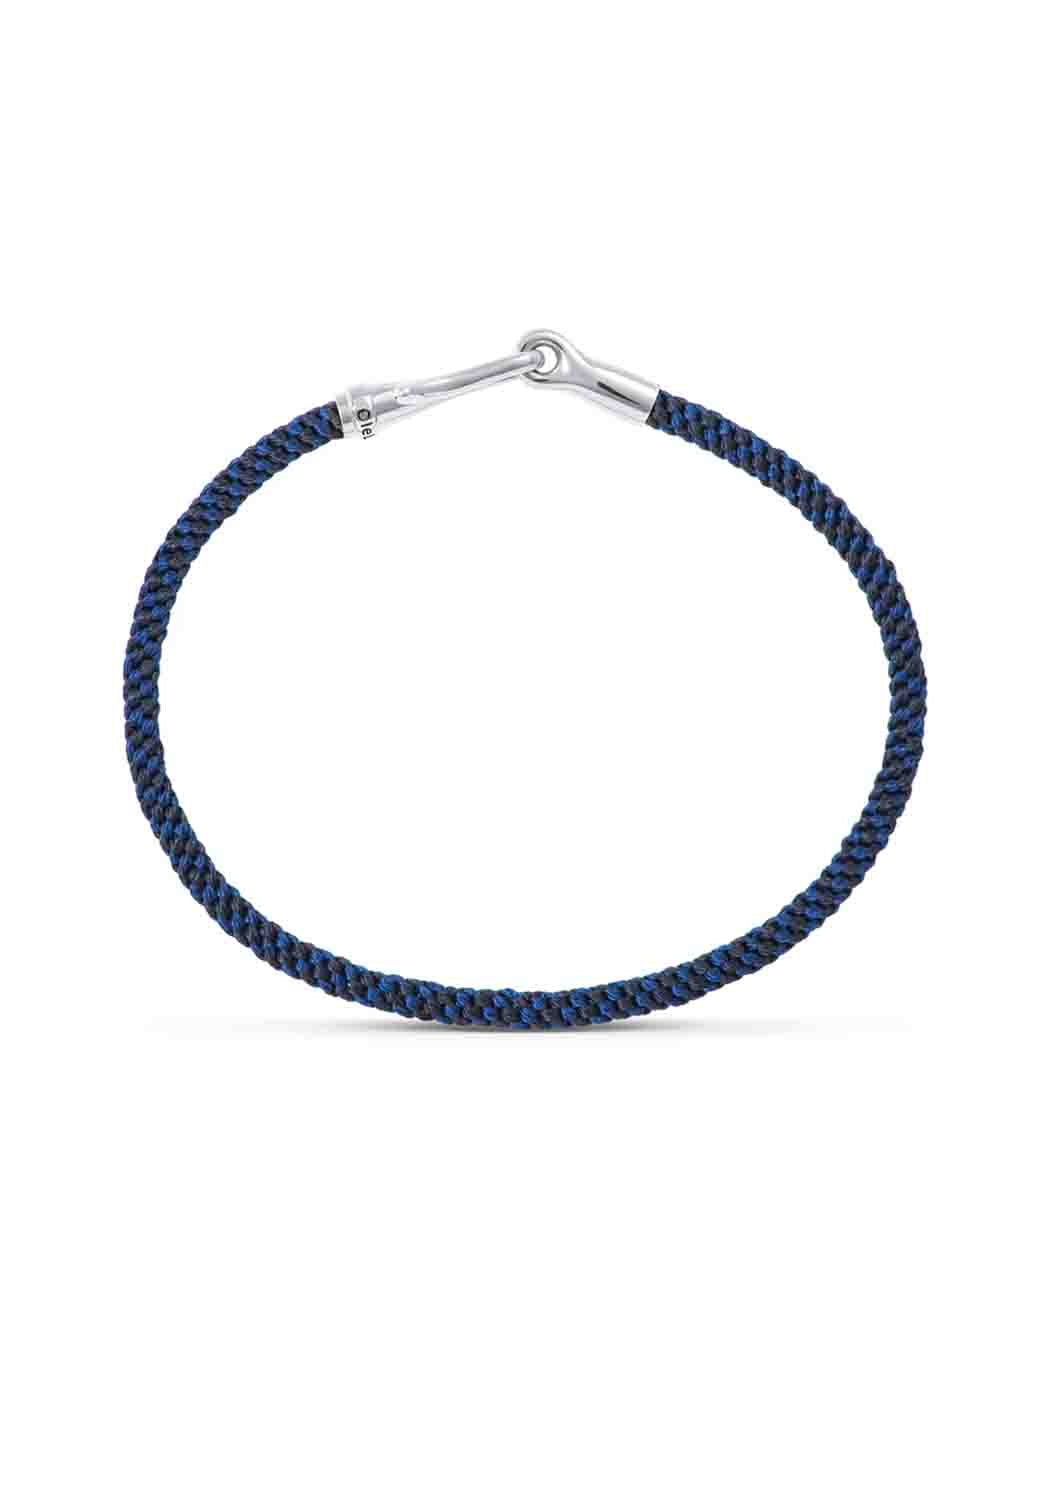 Ole LYNGGAARD Copenhagen Life Bracelet in White Gold with Midnight Theme Size: 16